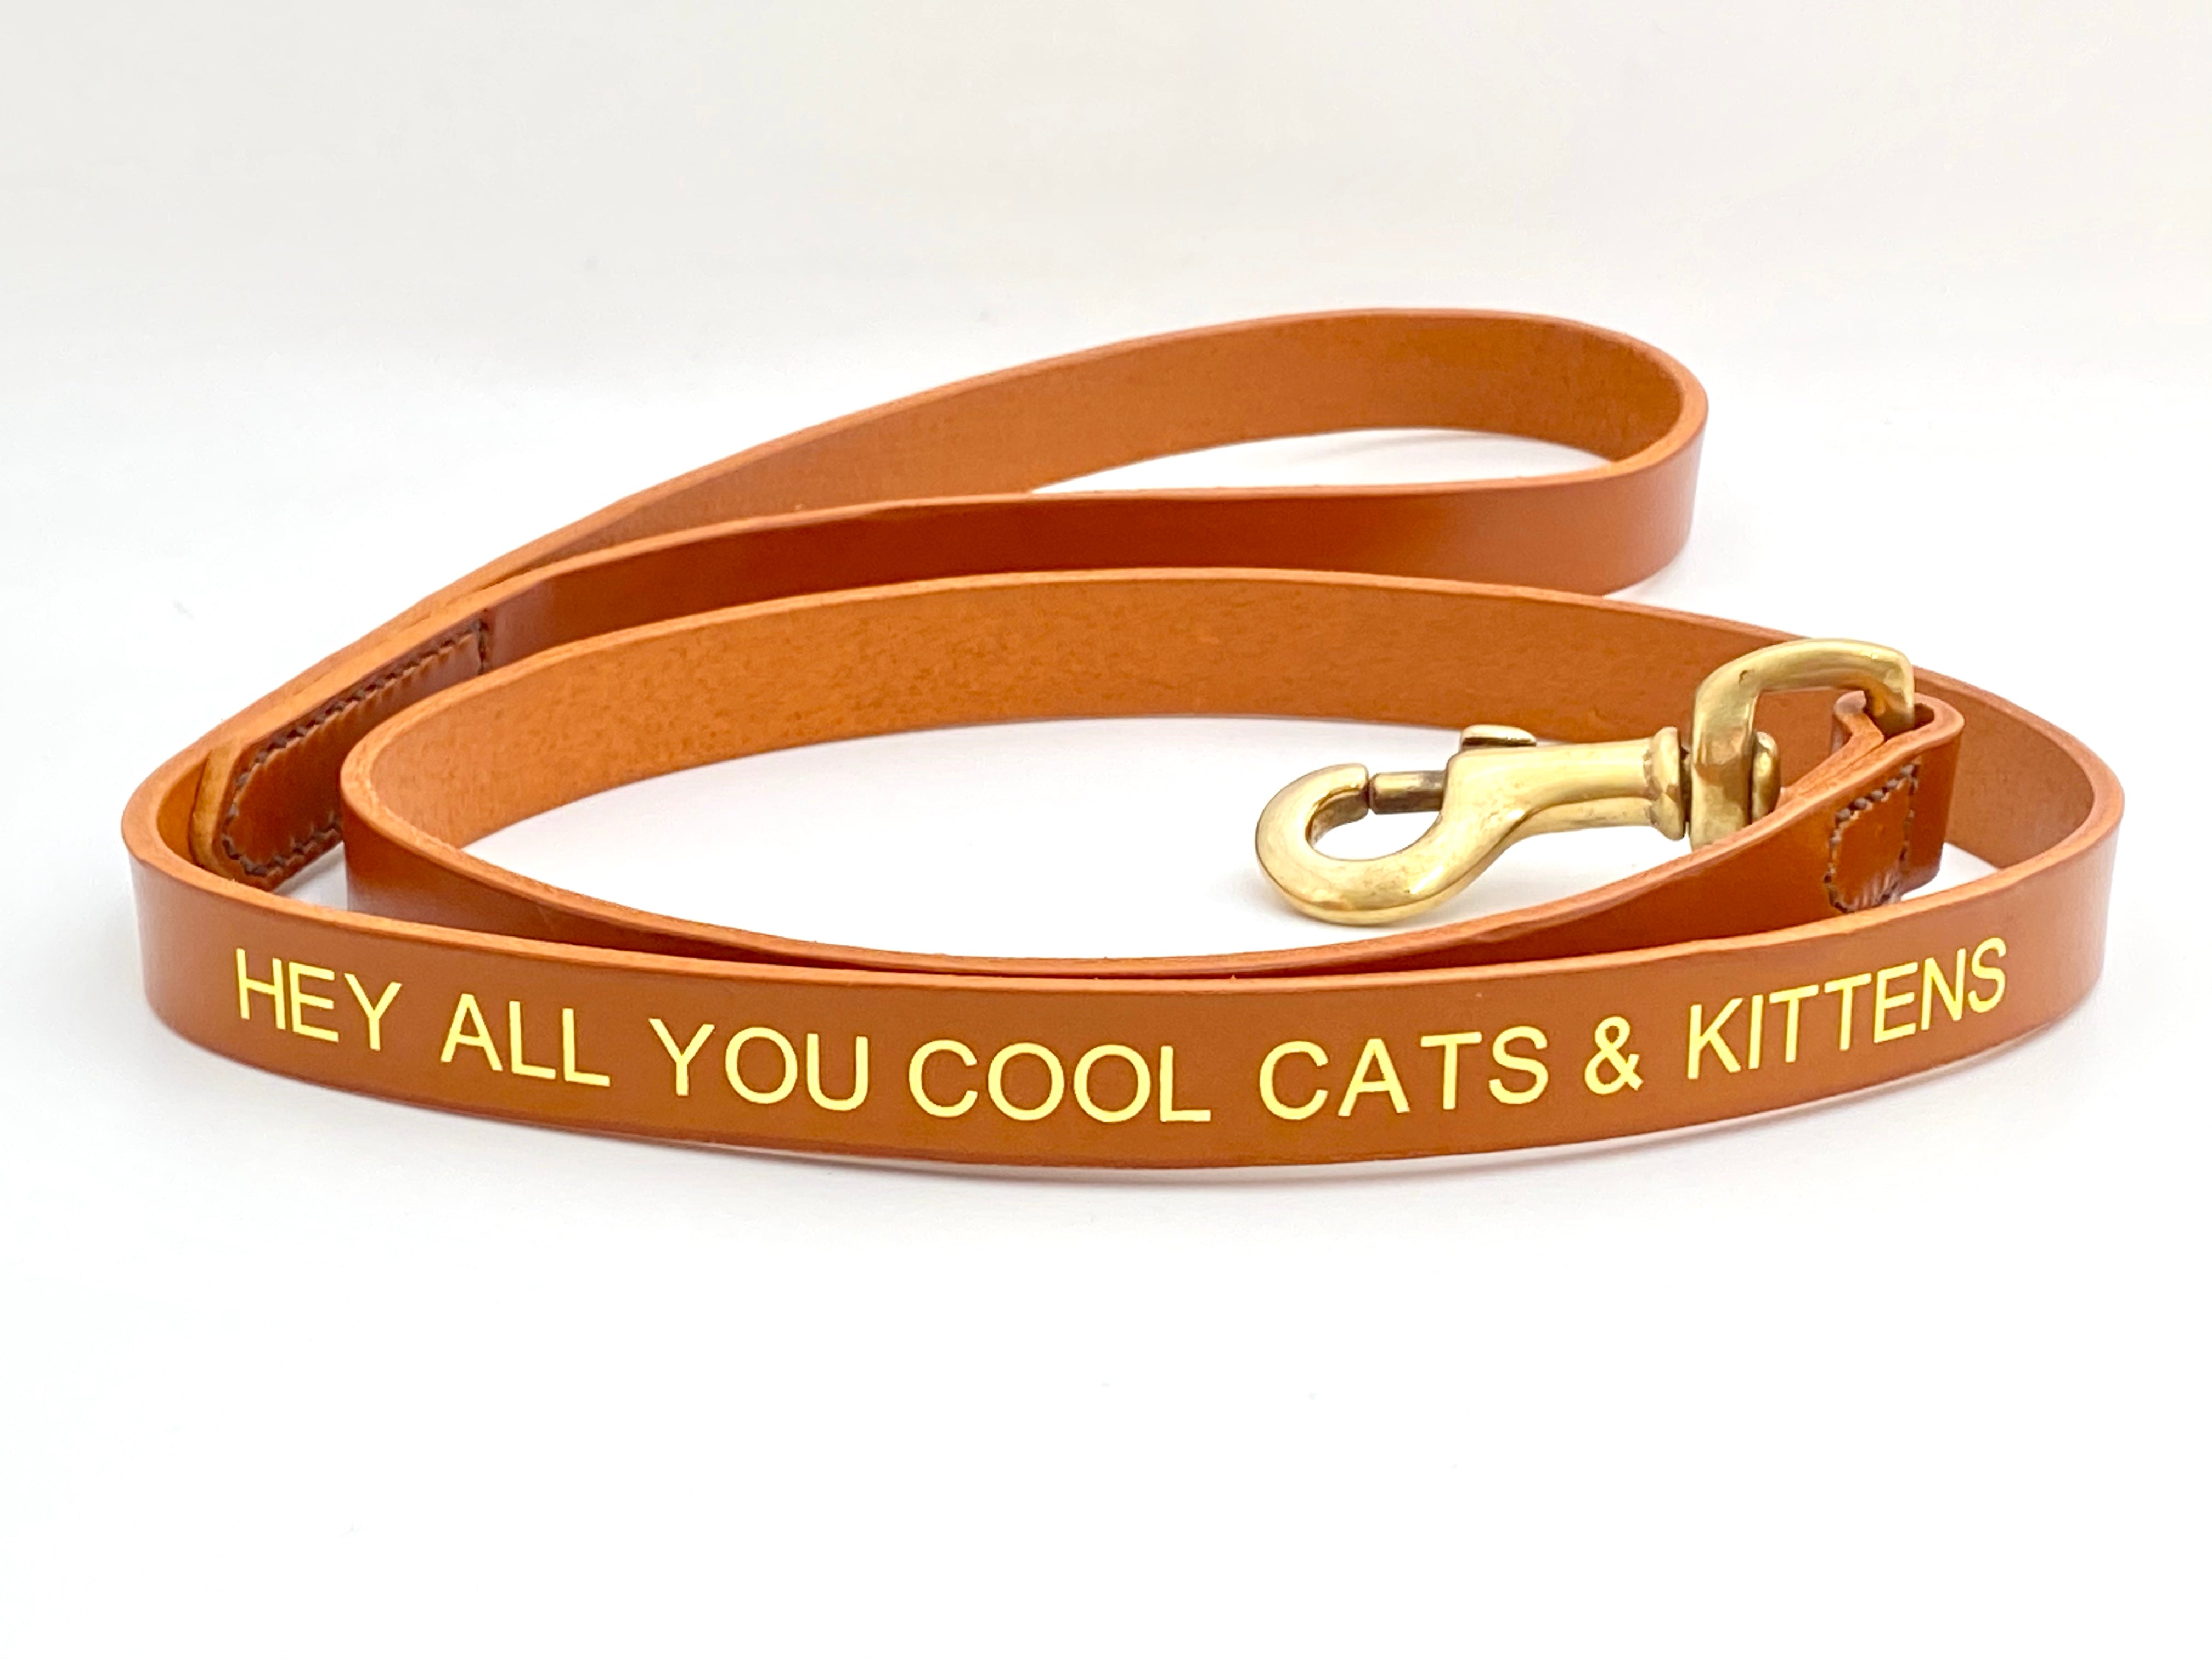 hey all you cool cats and kittens leather dog lead